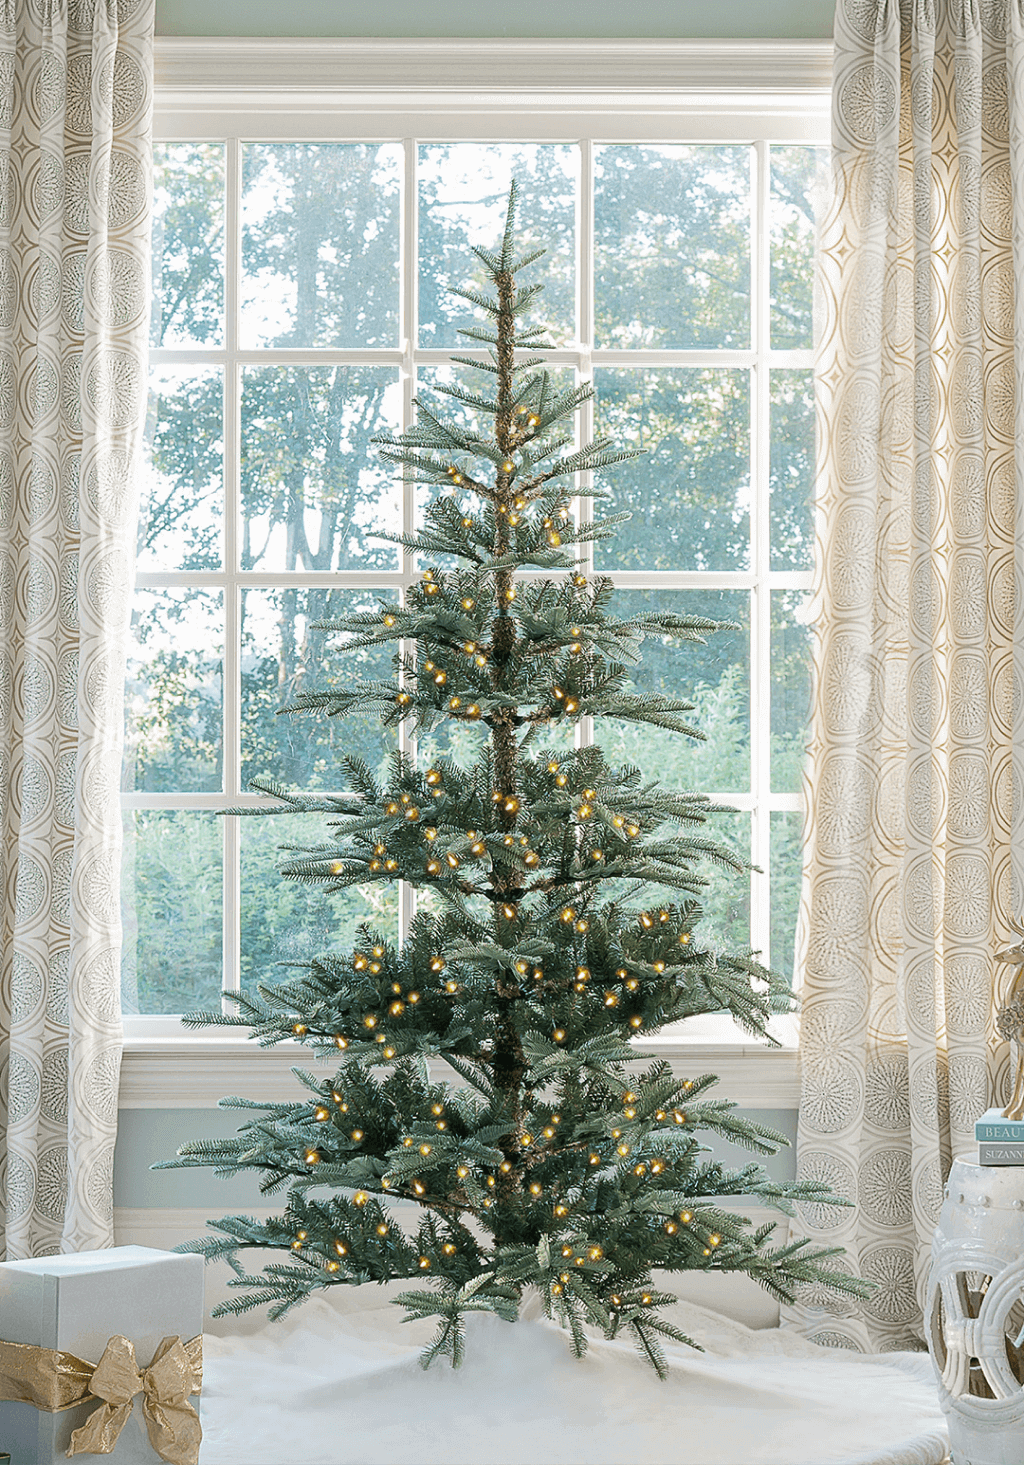 King of Christmas (OPEN BOX) 8' KING NOBLE FIR ARTIFICIAL TREE WITH 600 WARM WHITE LED LIGHTS, FINAL SALE